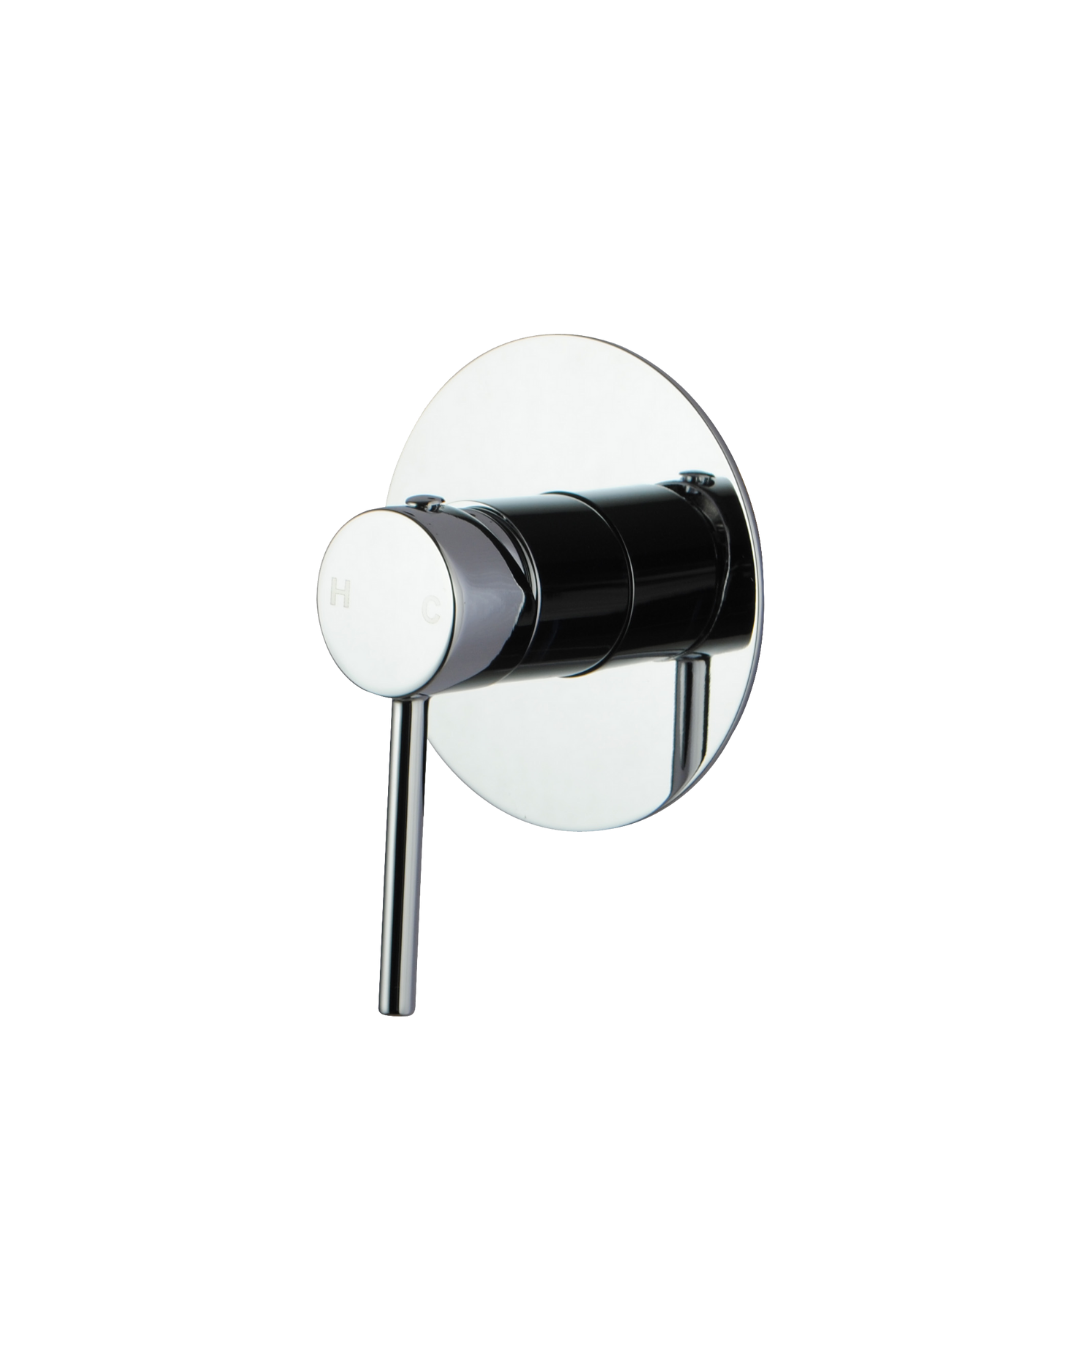 Pentro Shower Mixer with 80mm cover plate